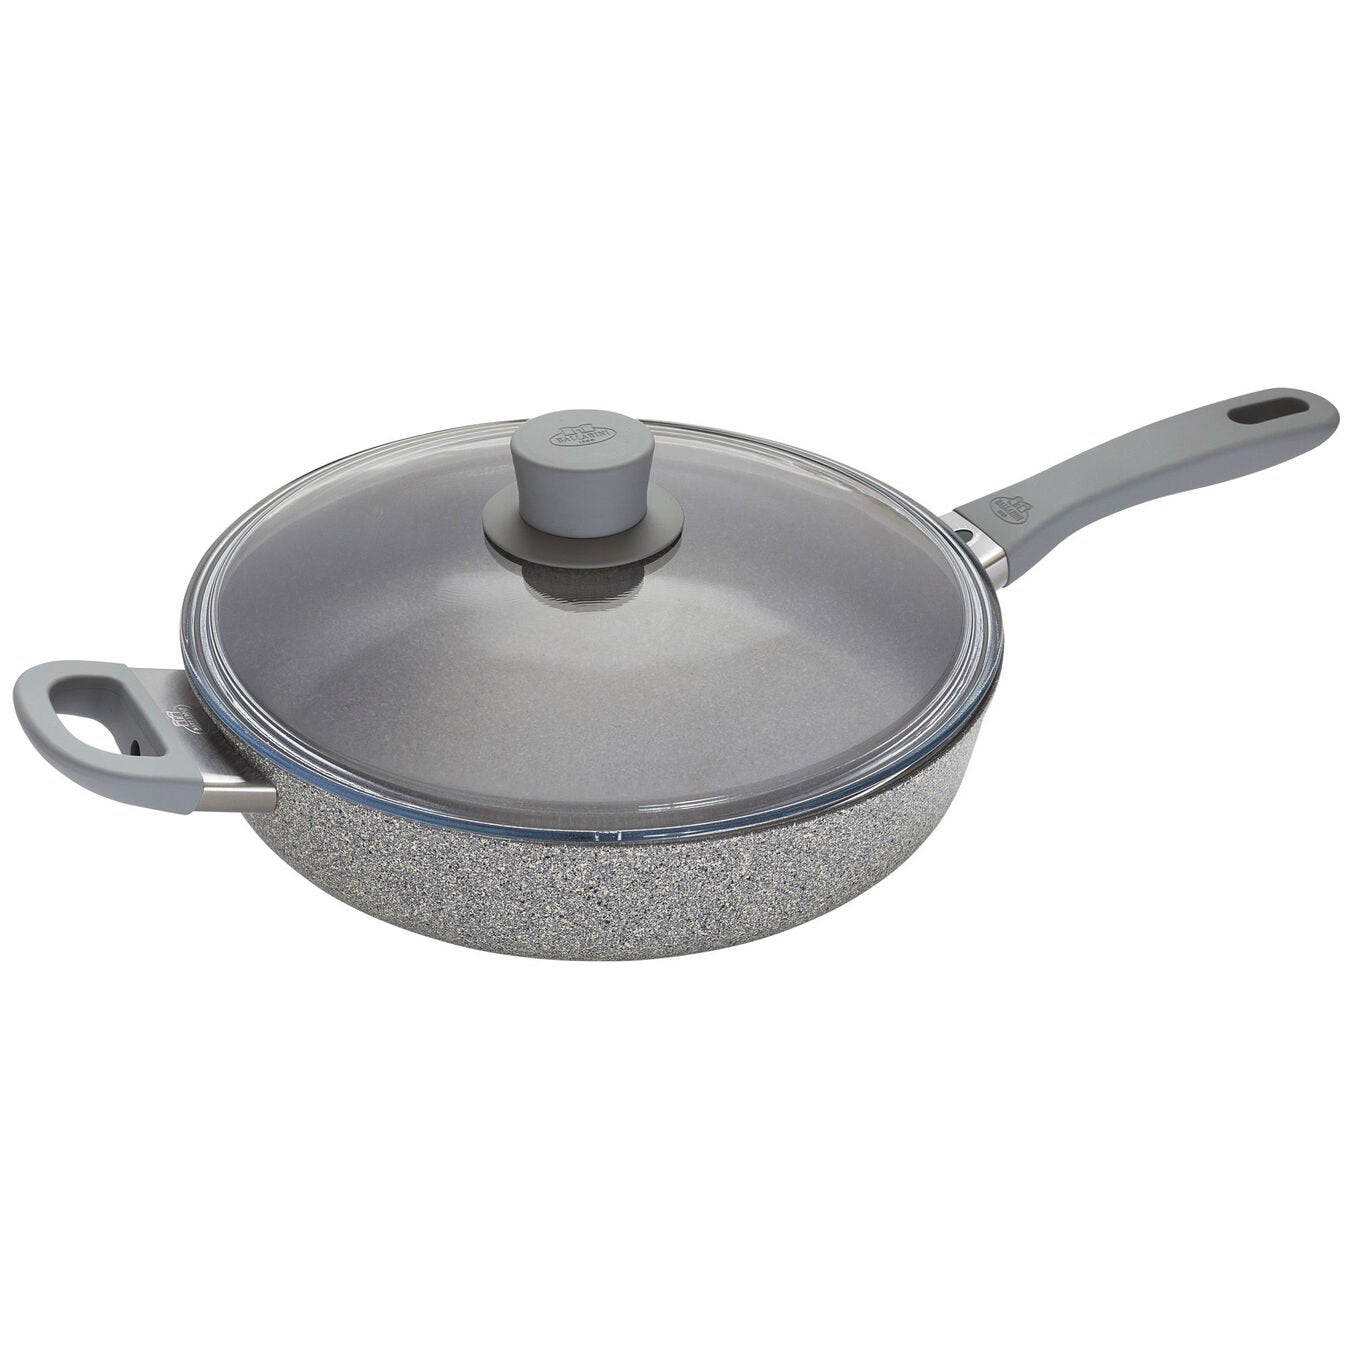 saute pan with lid and helper handle on white background